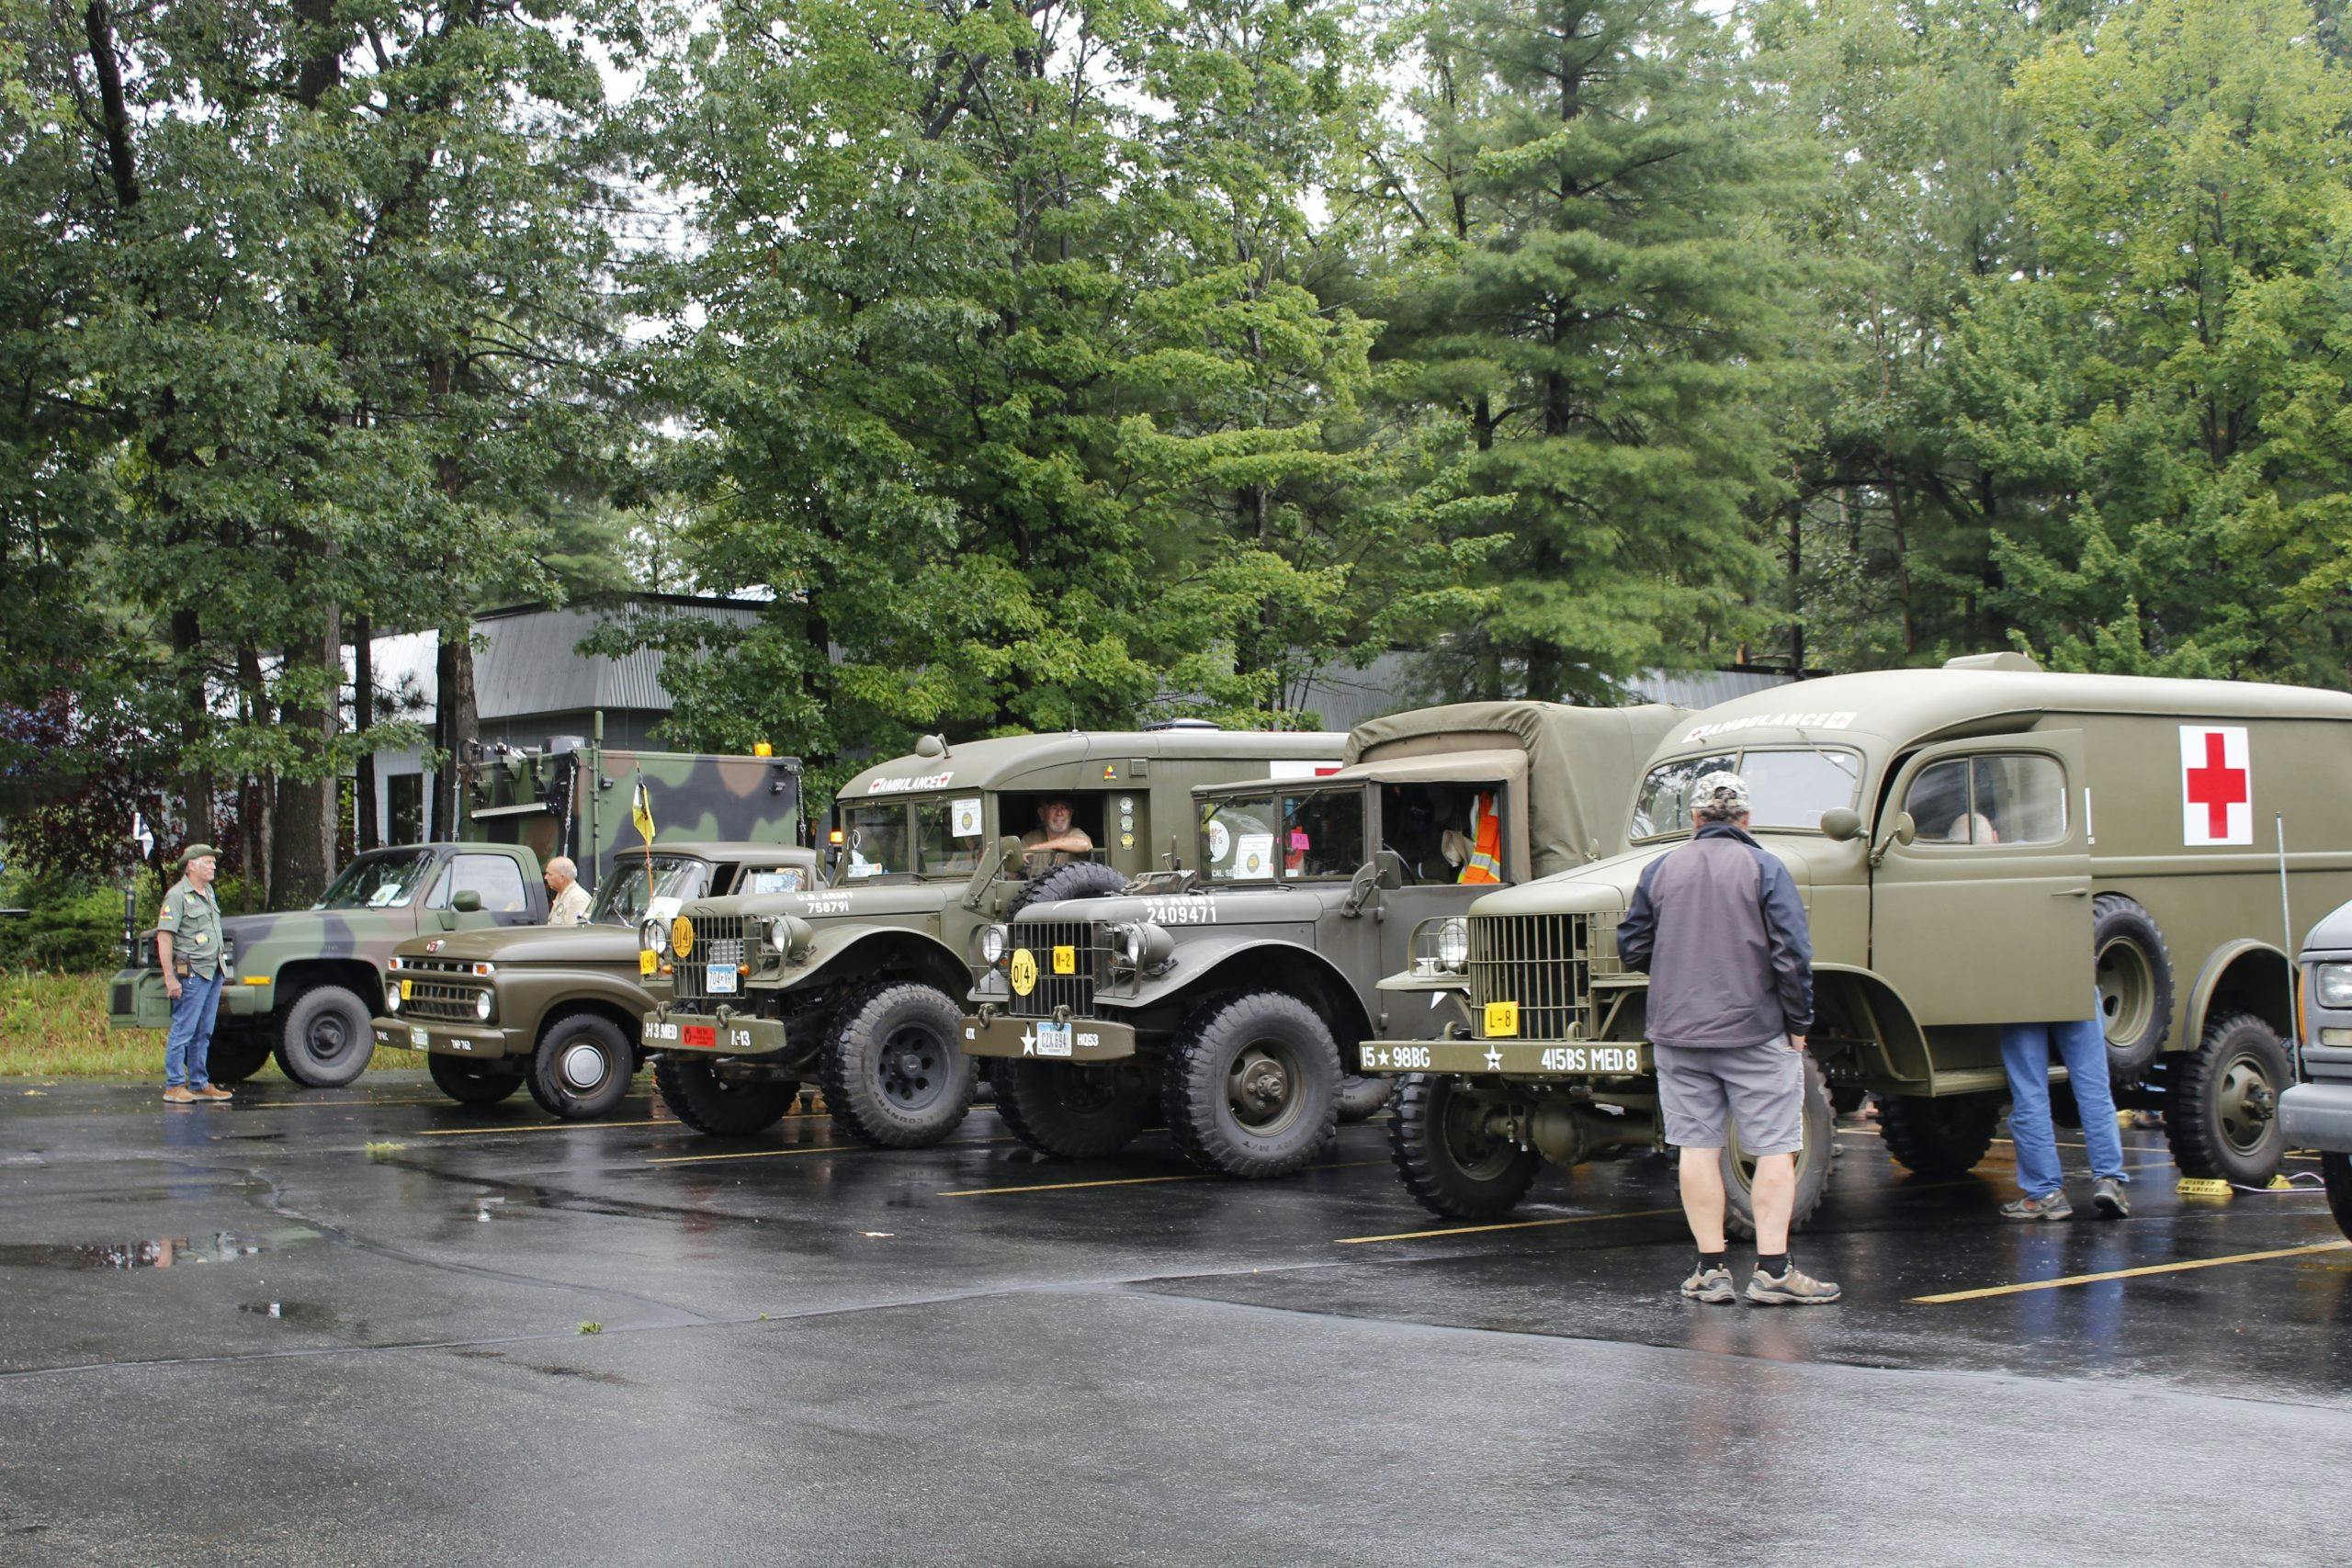 Military vehicle convoy parking lineup